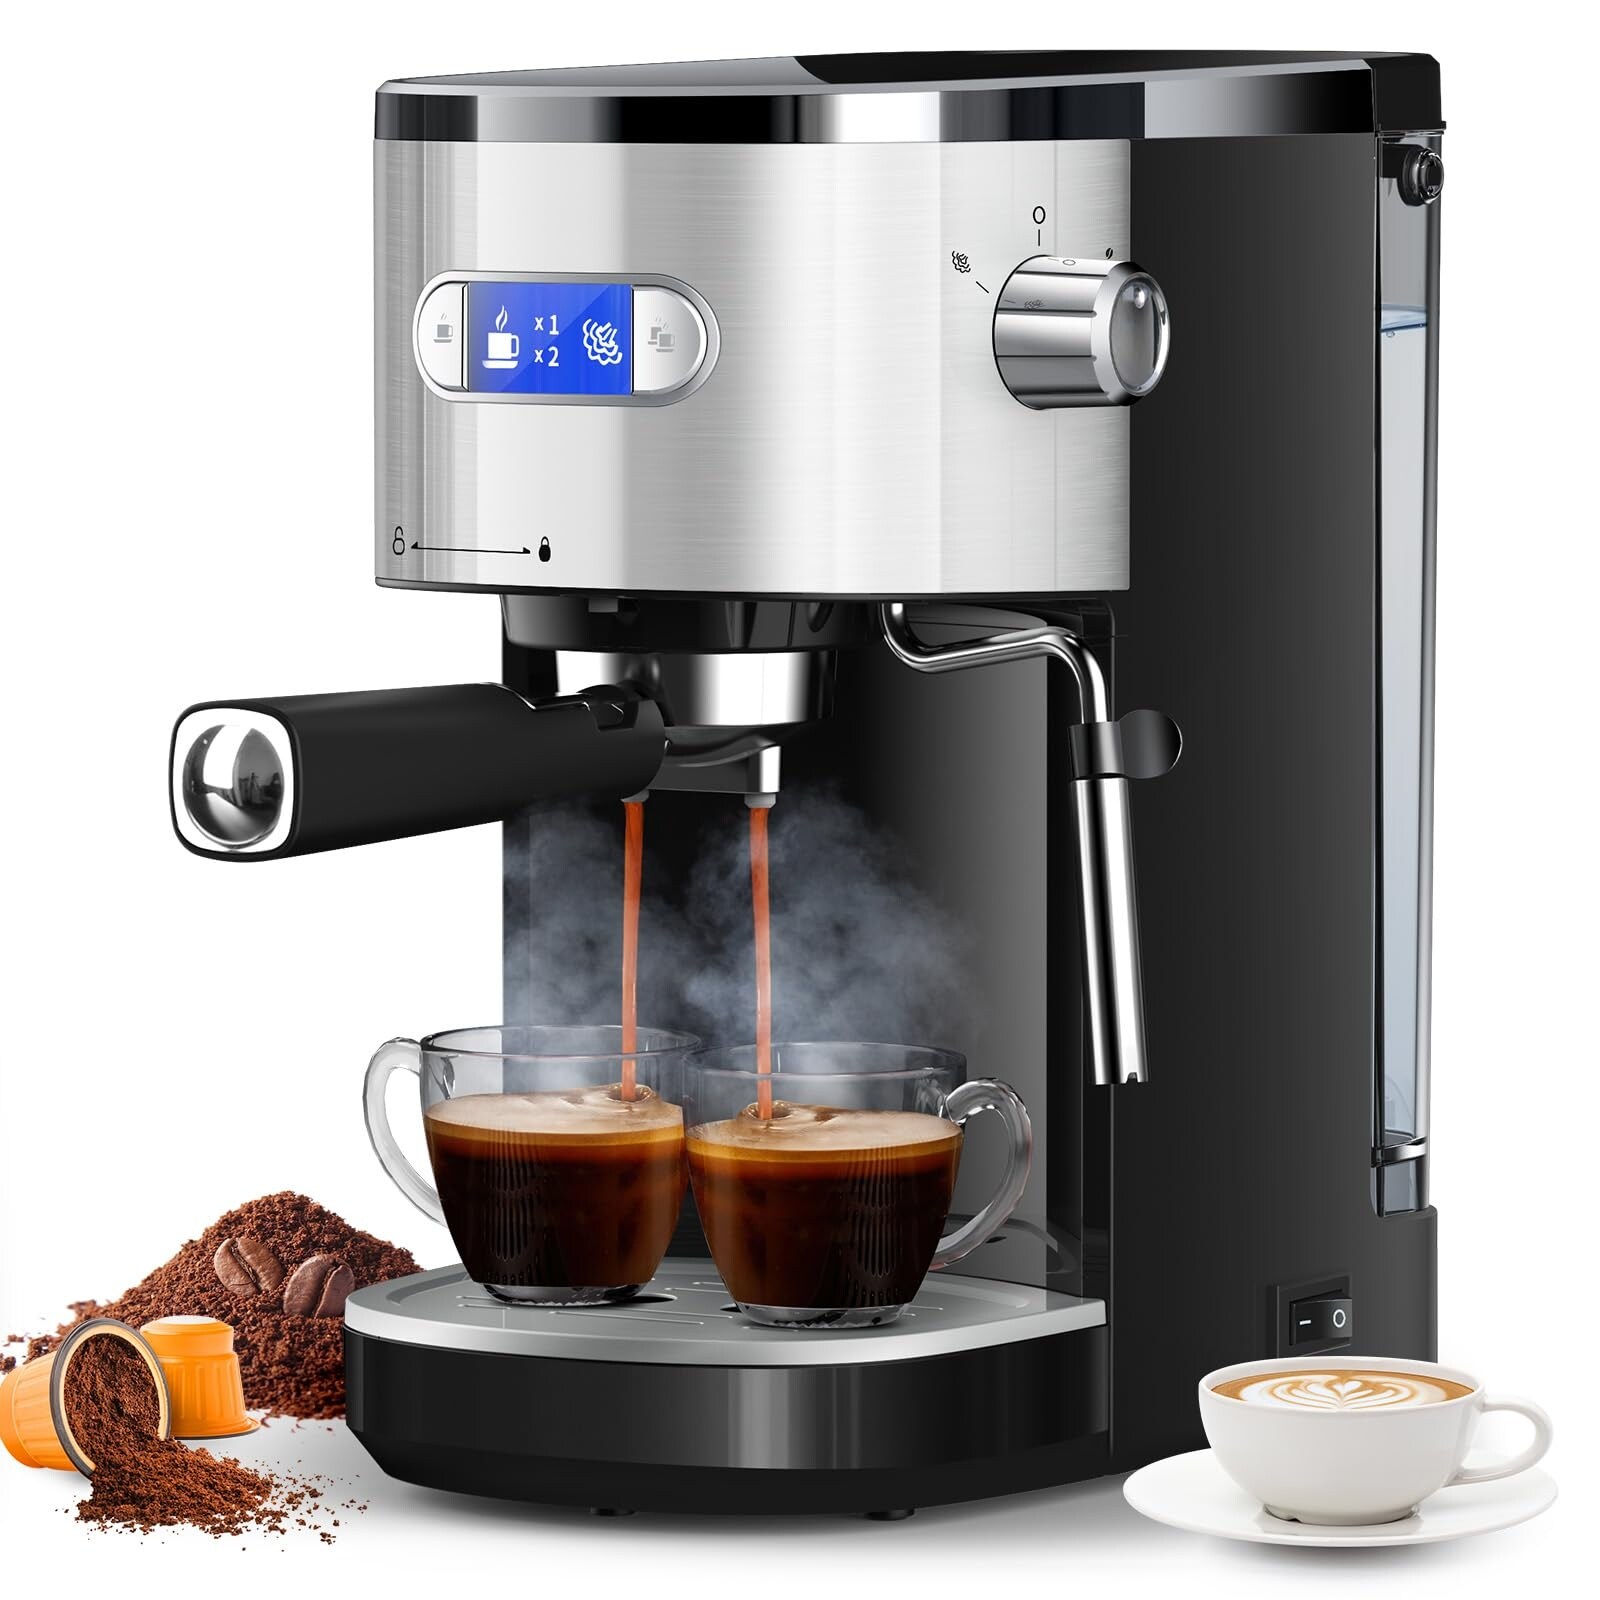 https://ak1.ostkcdn.com/images/products/is/images/direct/80cb43f7f8260fd1e7f37b0a16adbb47eae7d2e2/Espresso-Machine-20-Bar%2C-Semi-Automatic-Espresso-Maker-with-Milk-Frother-Steam-Wand%2C-45-oz-Removable-Water-Tank-for-Cappuccino.jpg